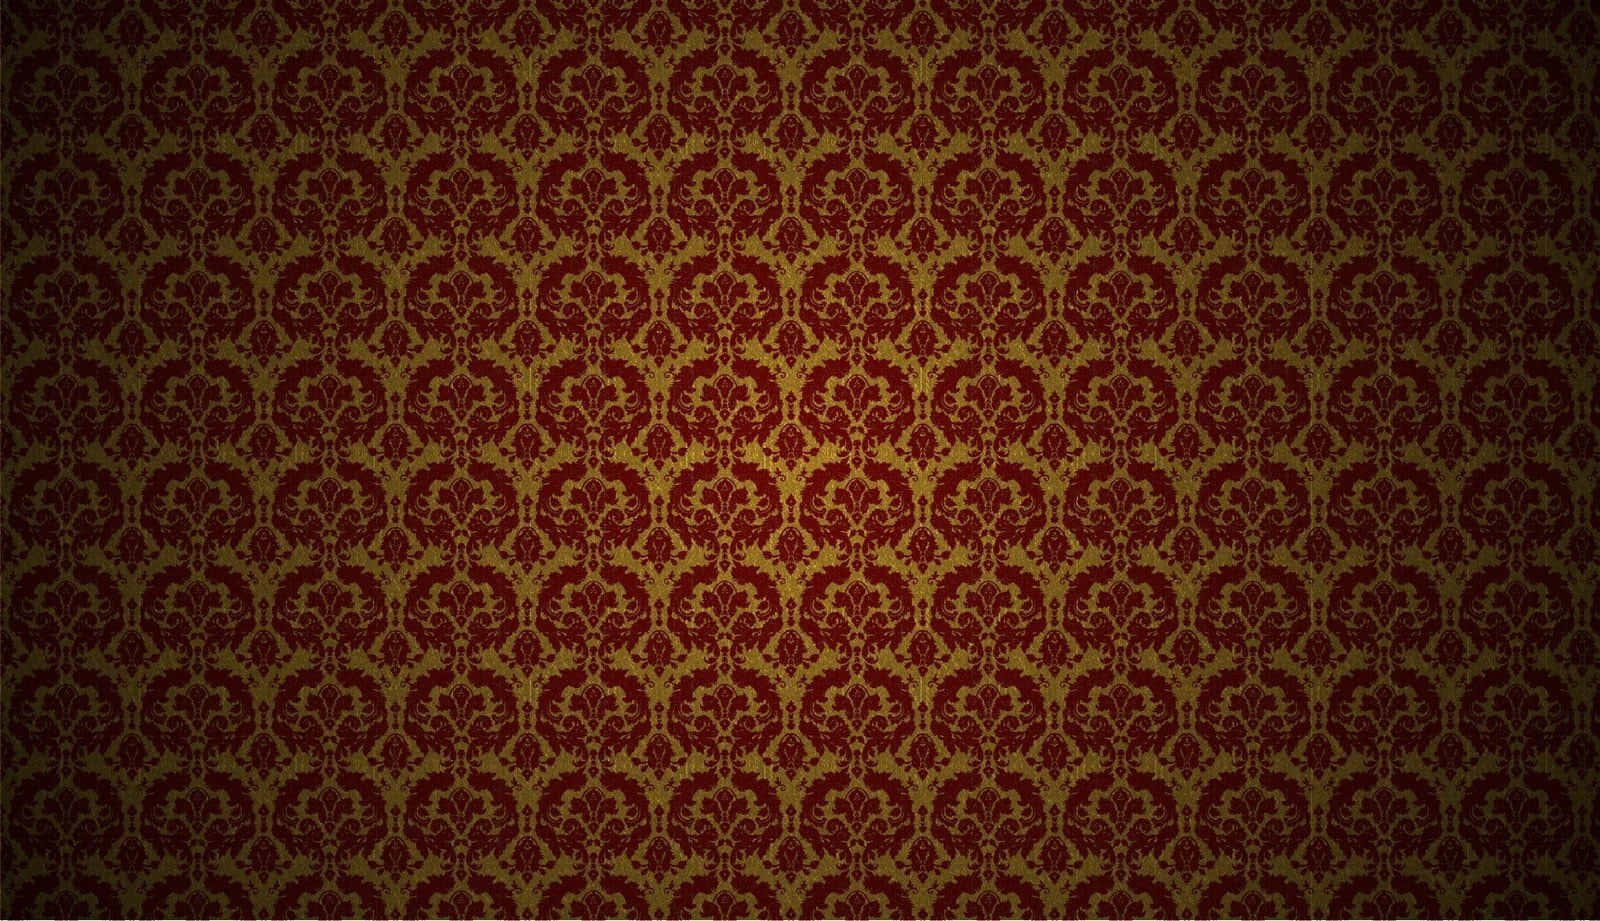 Illuminated Red and Gold Wallpaper